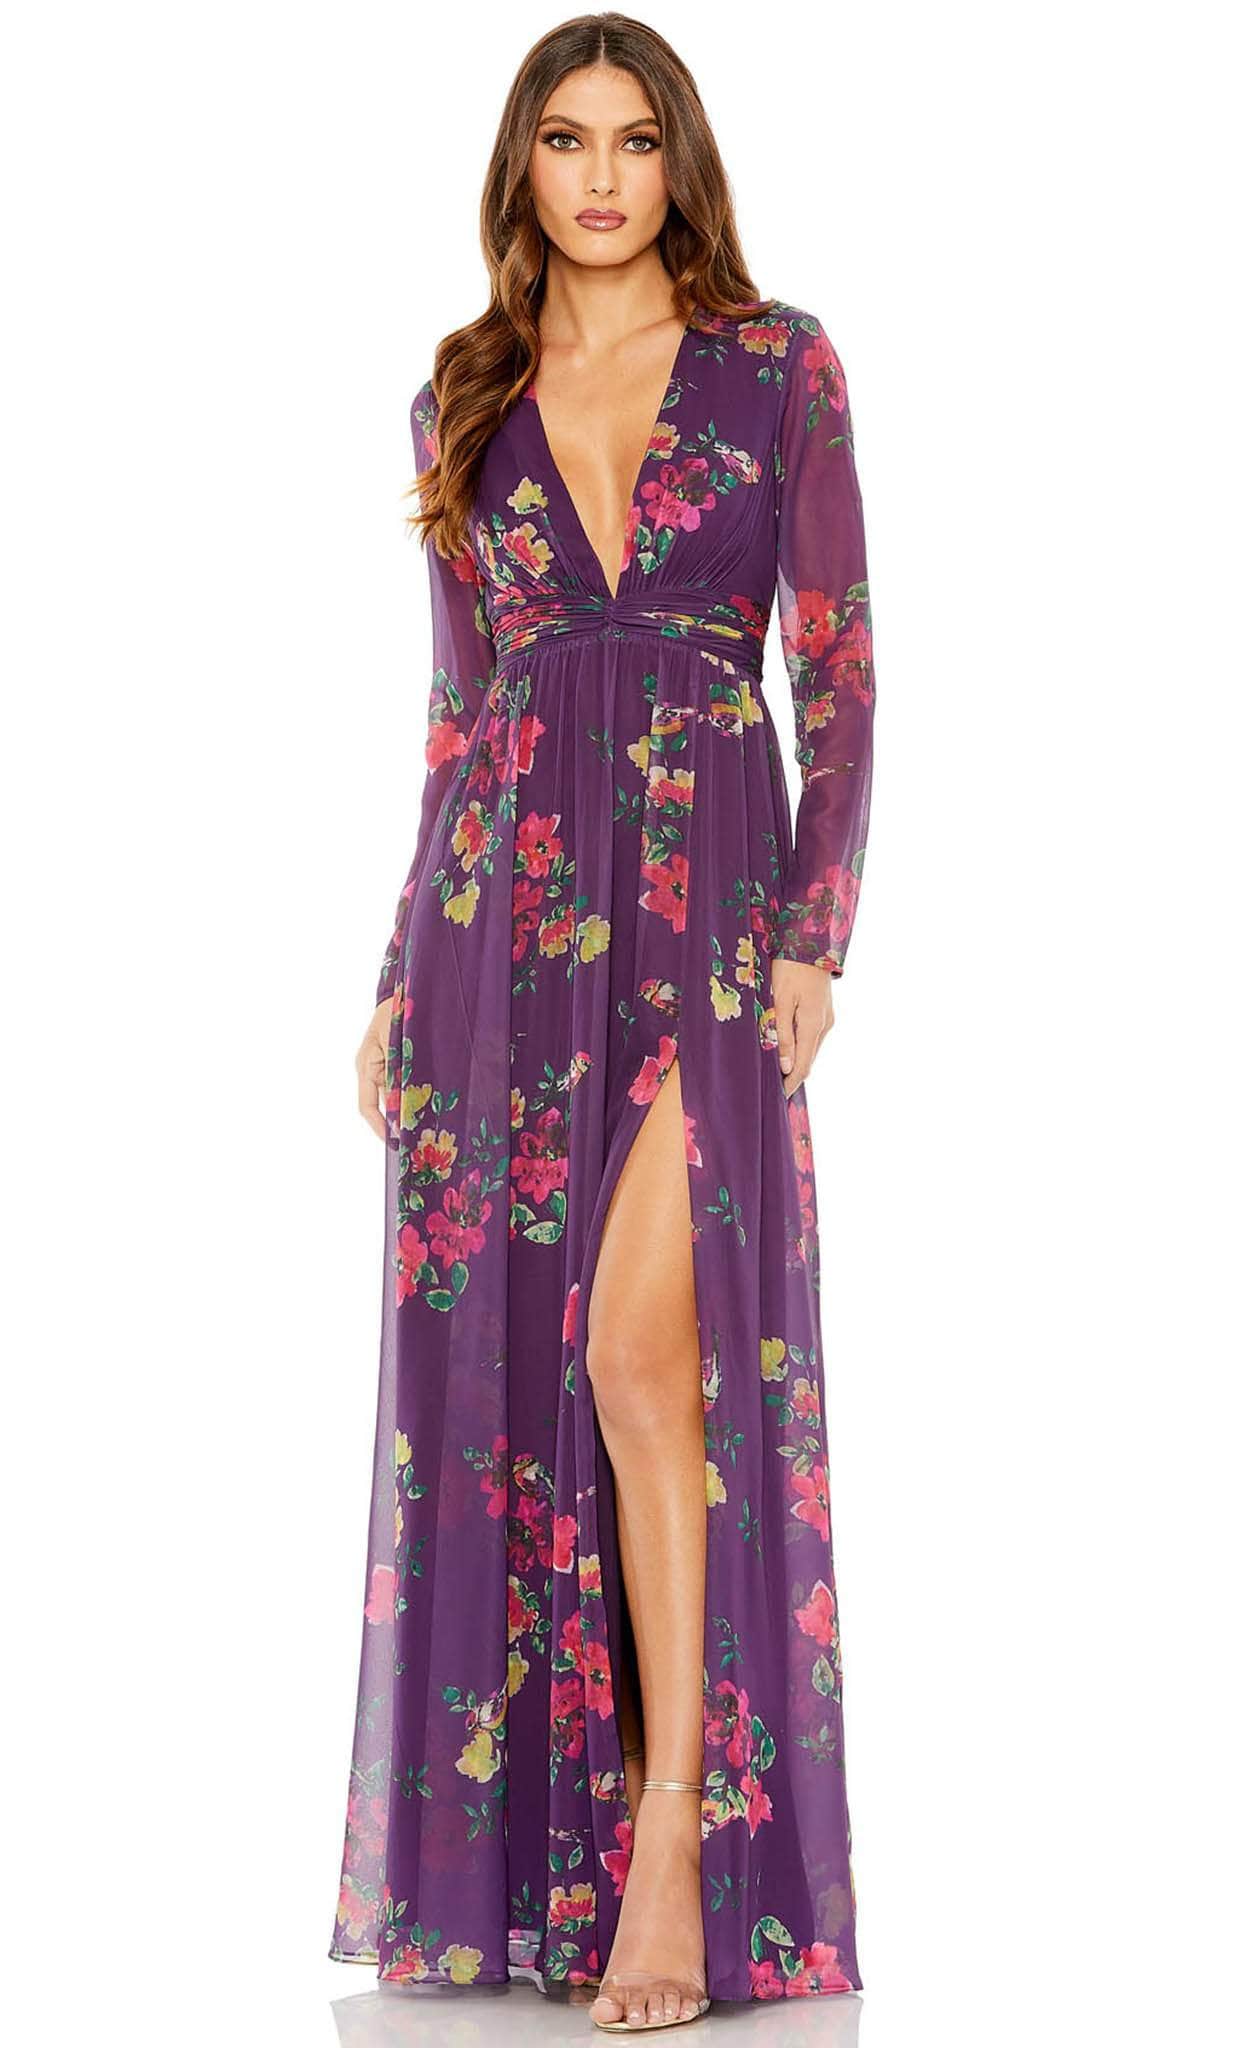 Ieena Duggal 68558 - Long Sleeve Plunging Neck Long Dress Special Occasion Dress 4 / Purple Multi